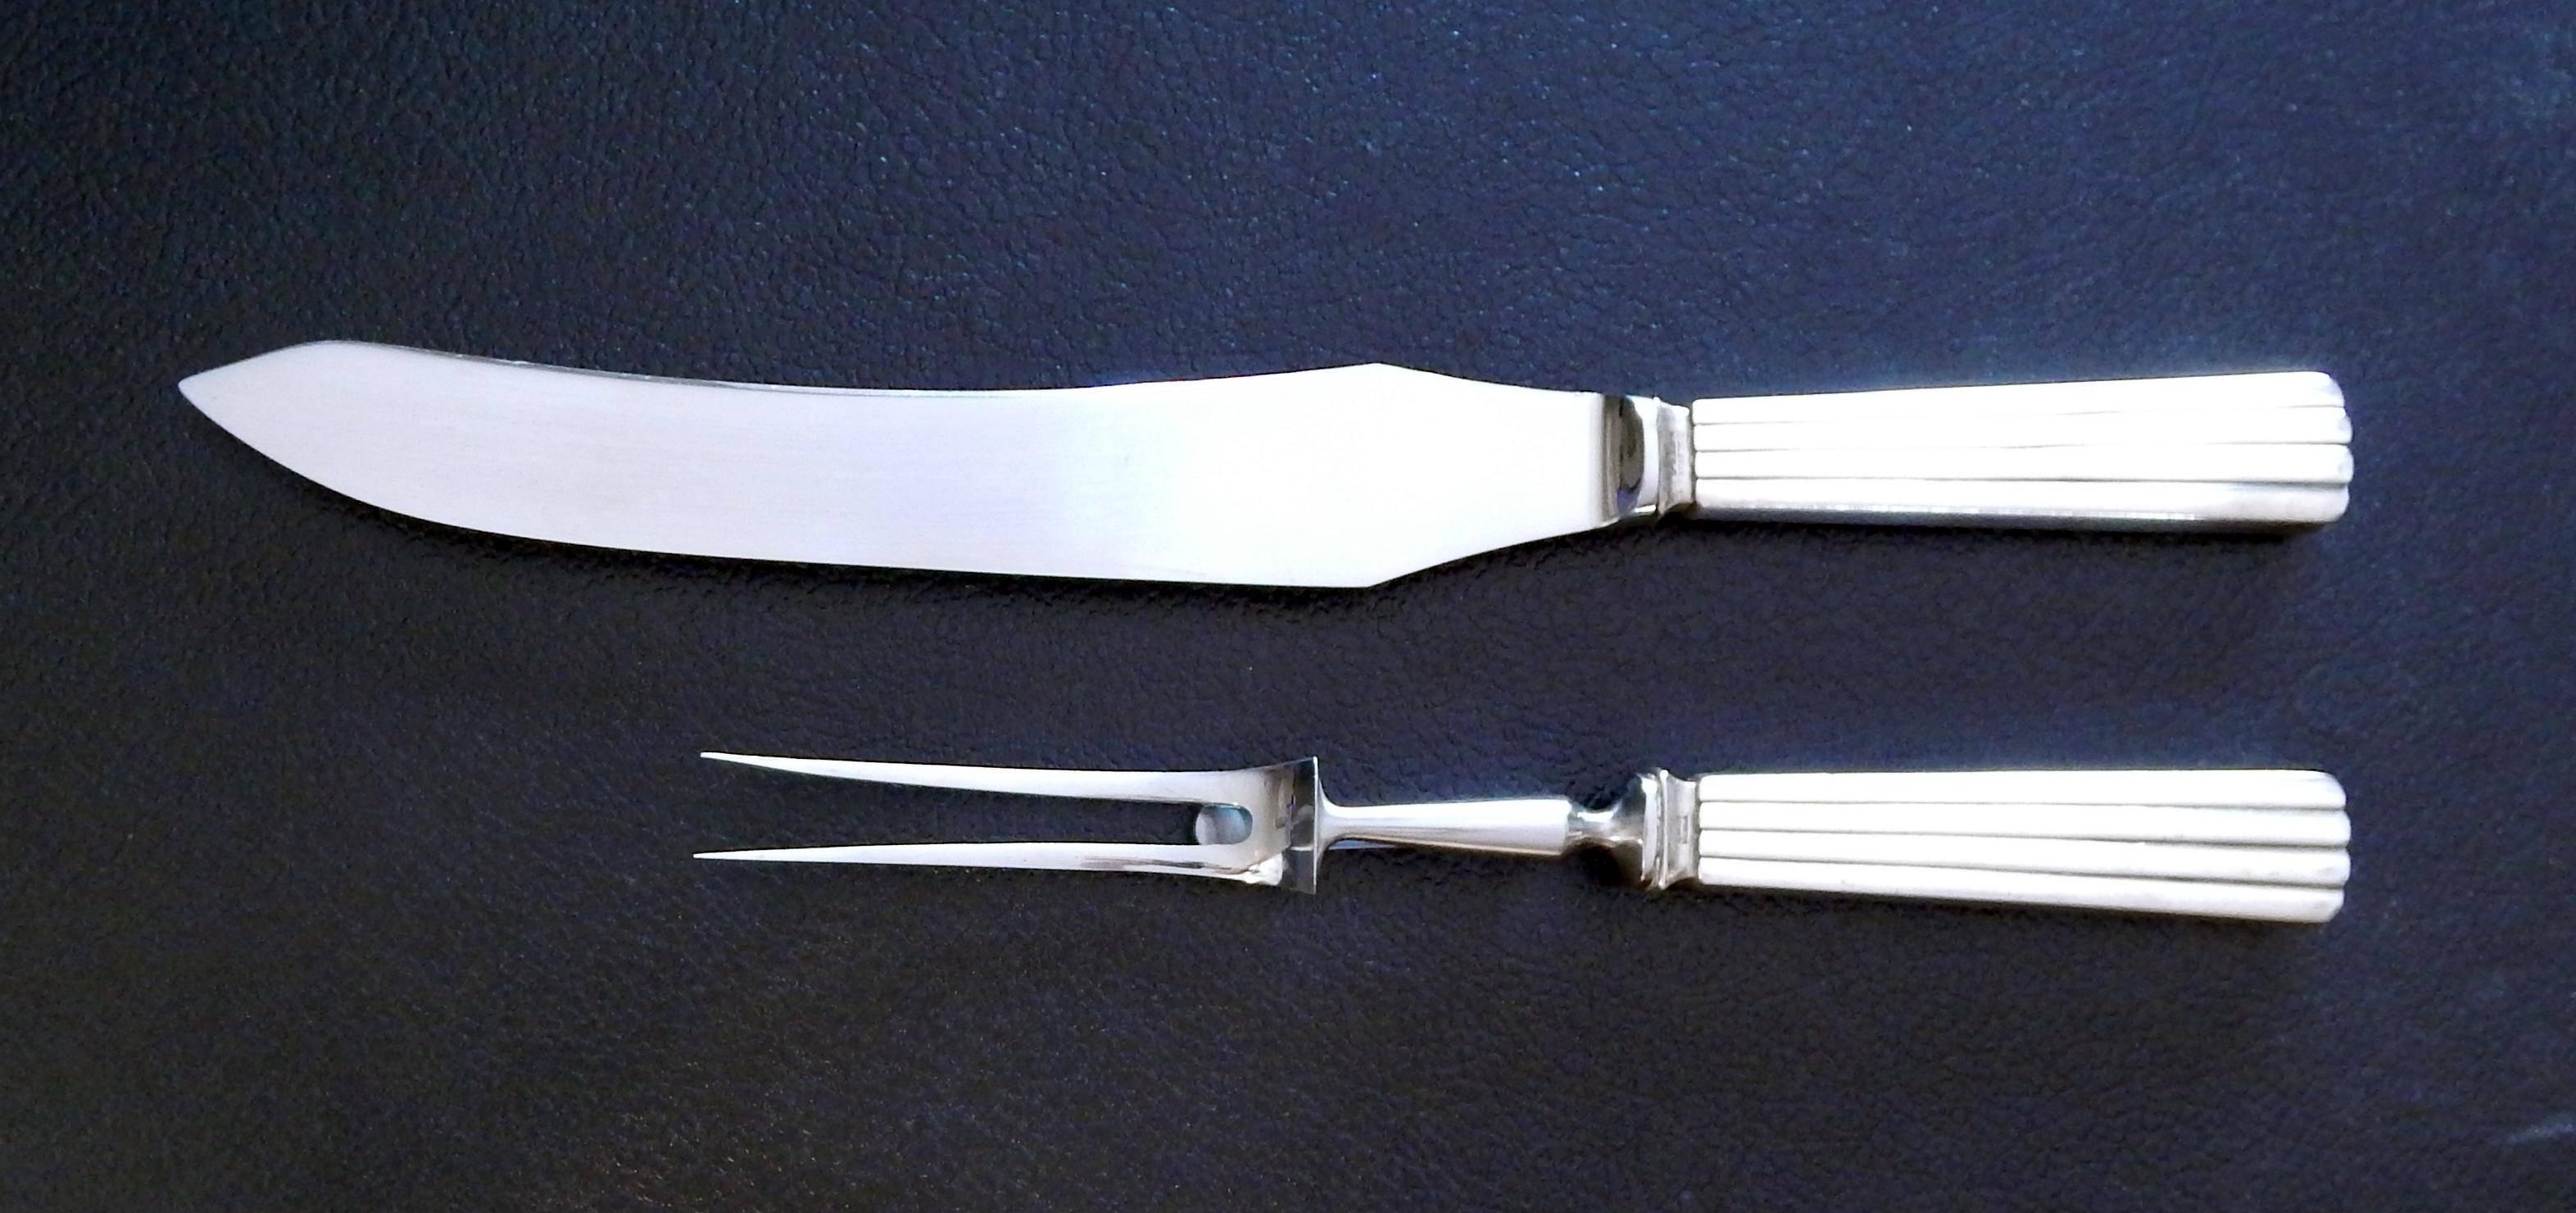 Georg Jensen sterling carving set, large, Bernadotte pattern.
Designed by: Sigvard Bernadotte (1907-2002) in 1939.
Sterling silver handles with stainless steel blade and tines.
In excellent vintage condition.
Marked: Sterling, Denmark, Georg